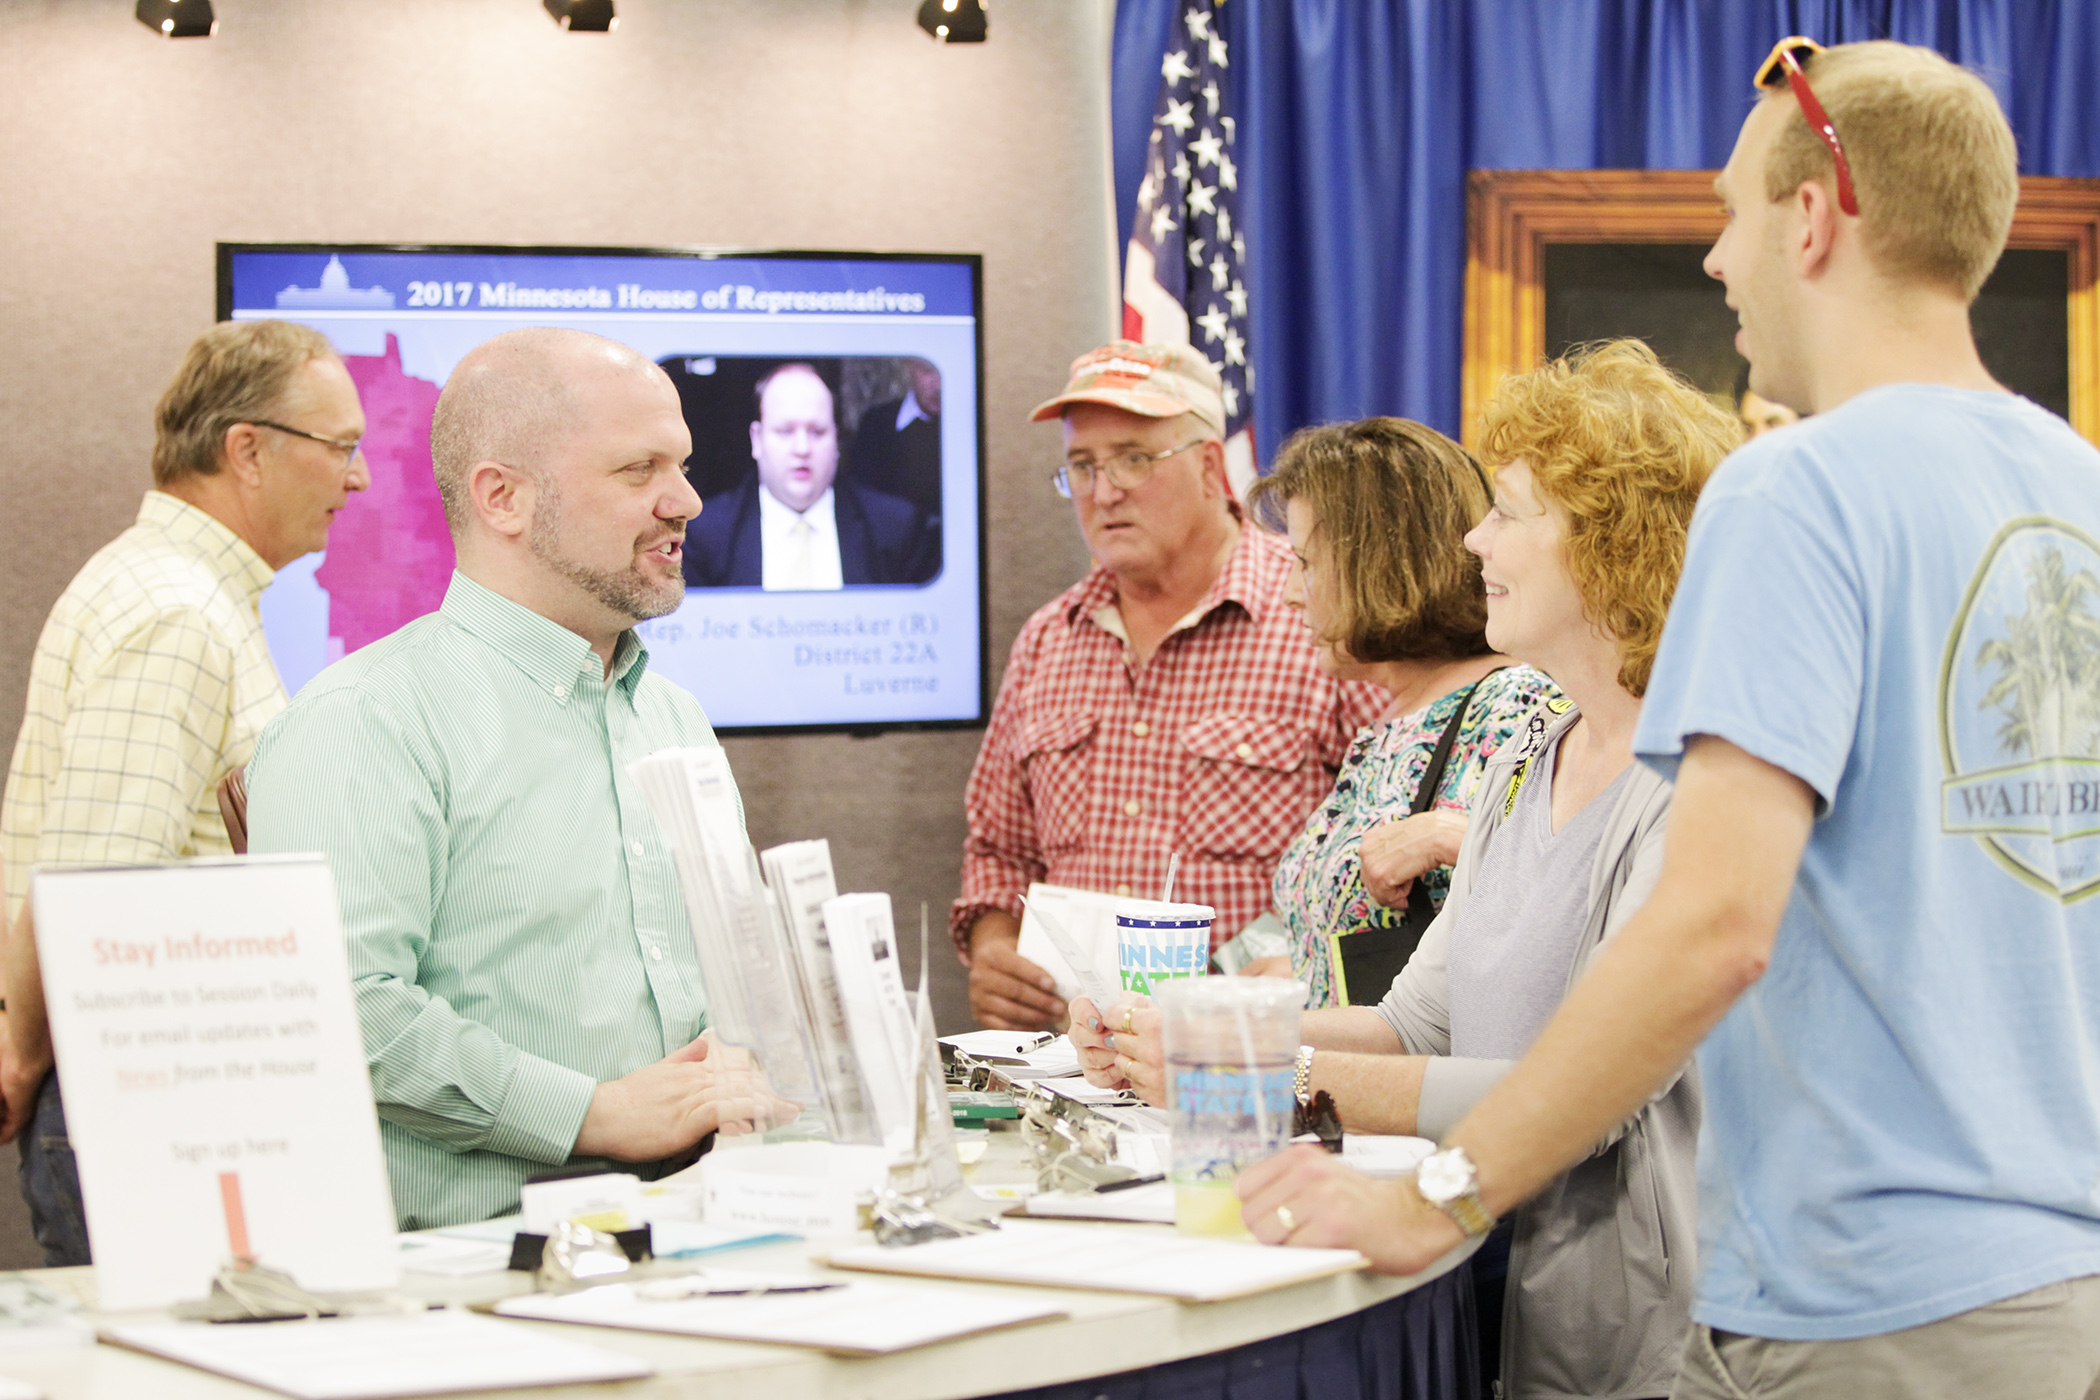 Rep. Mike Freiberg, second from left, and Rep. Paul Torkelson, behind, talk with visitors at the House booth during the 2017 state fair. Photo by Paul Battaglia